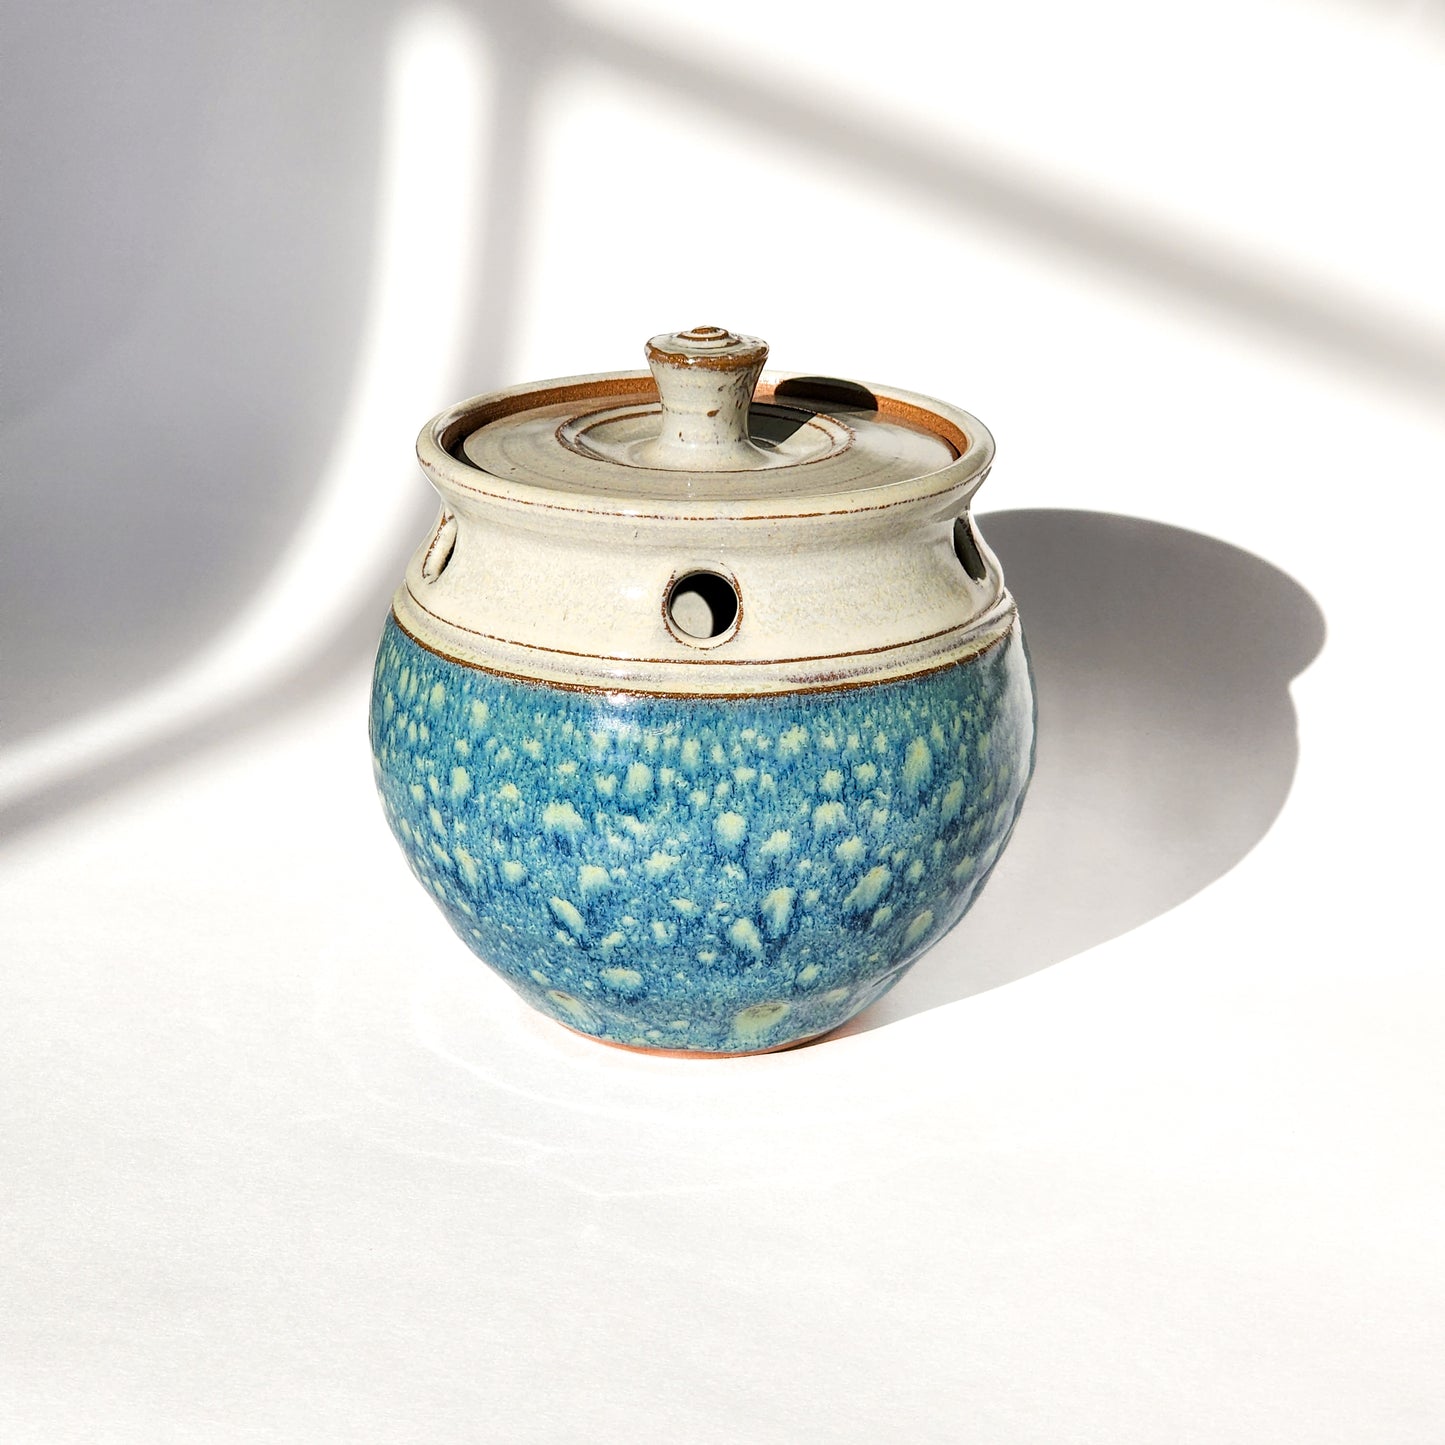 Image: A starry night ceramic garlic keeper, inspired by the night sky and designed to store garlic bulbs in style.